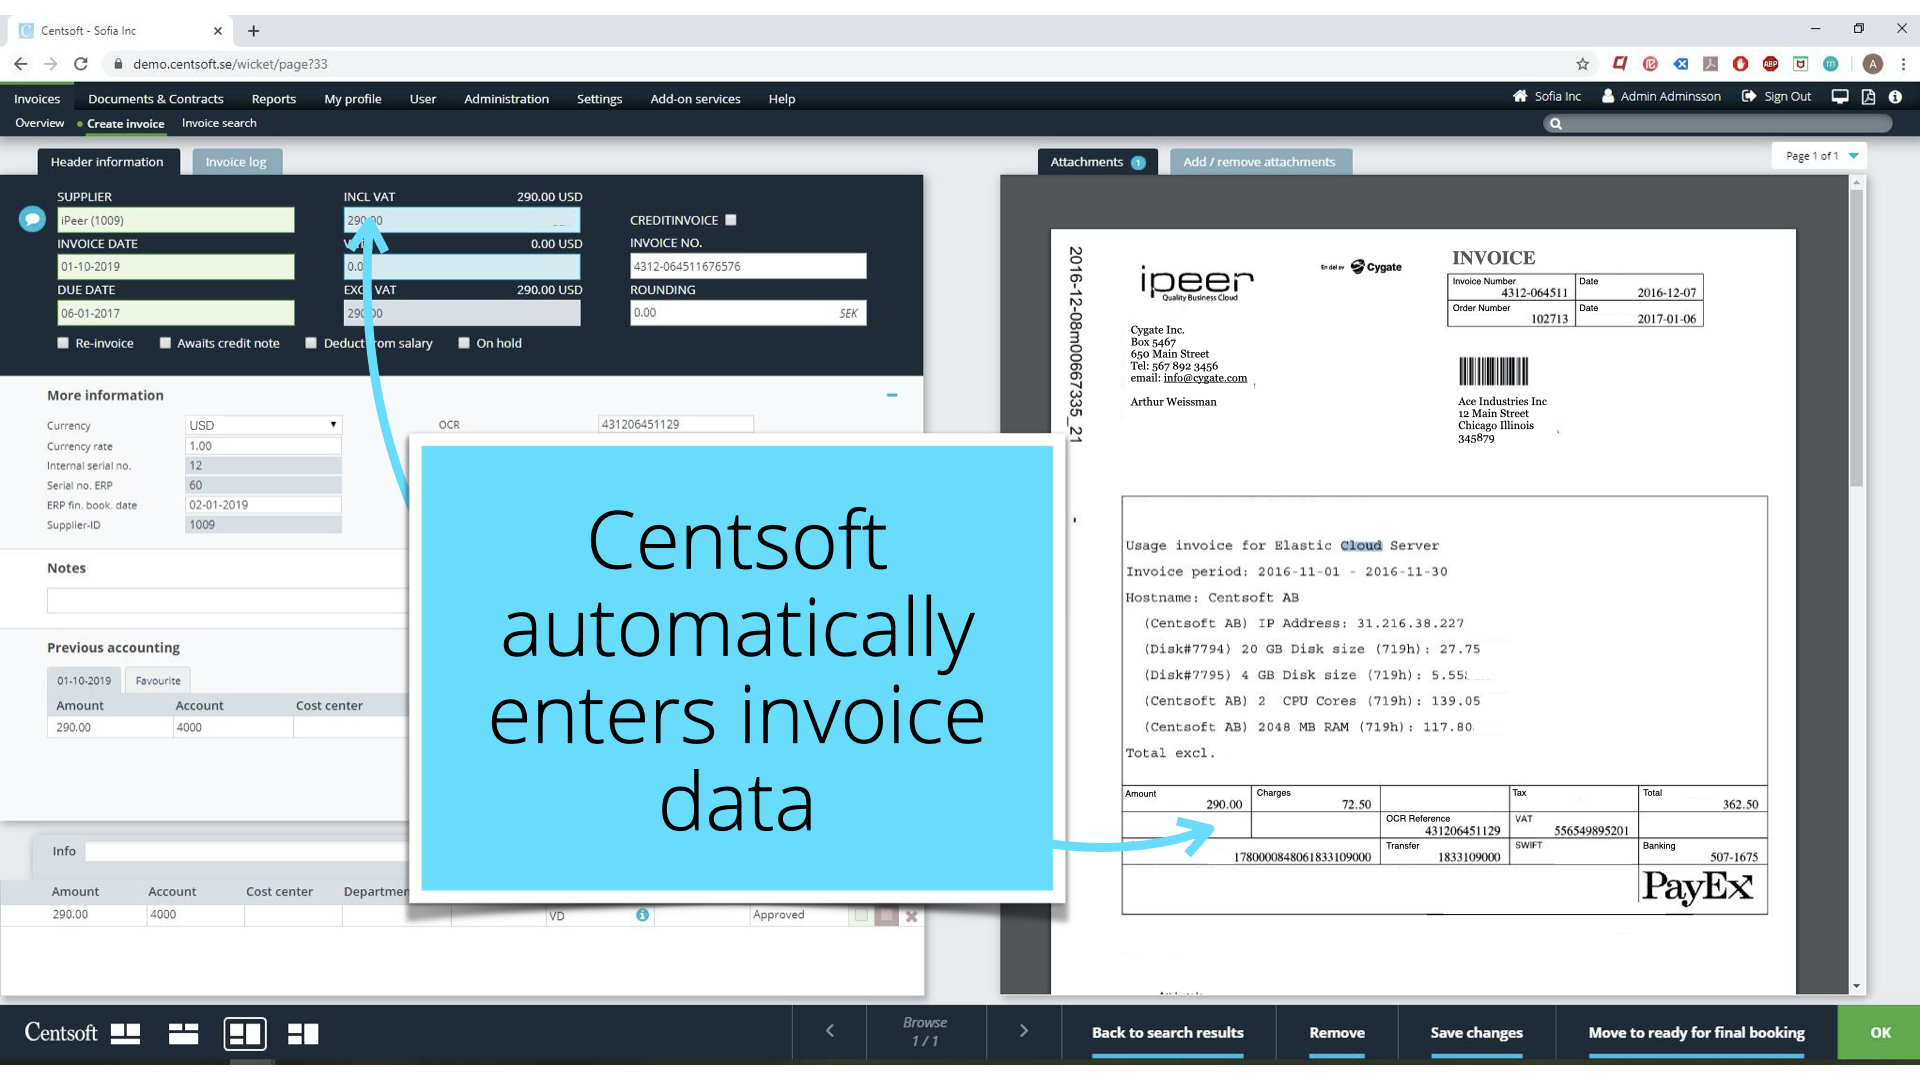 Invoice Capture - Rillion automatically captures your email and paper invoice data, so you don’t have to key vendor invoices manually. Save time by reducing manual work.